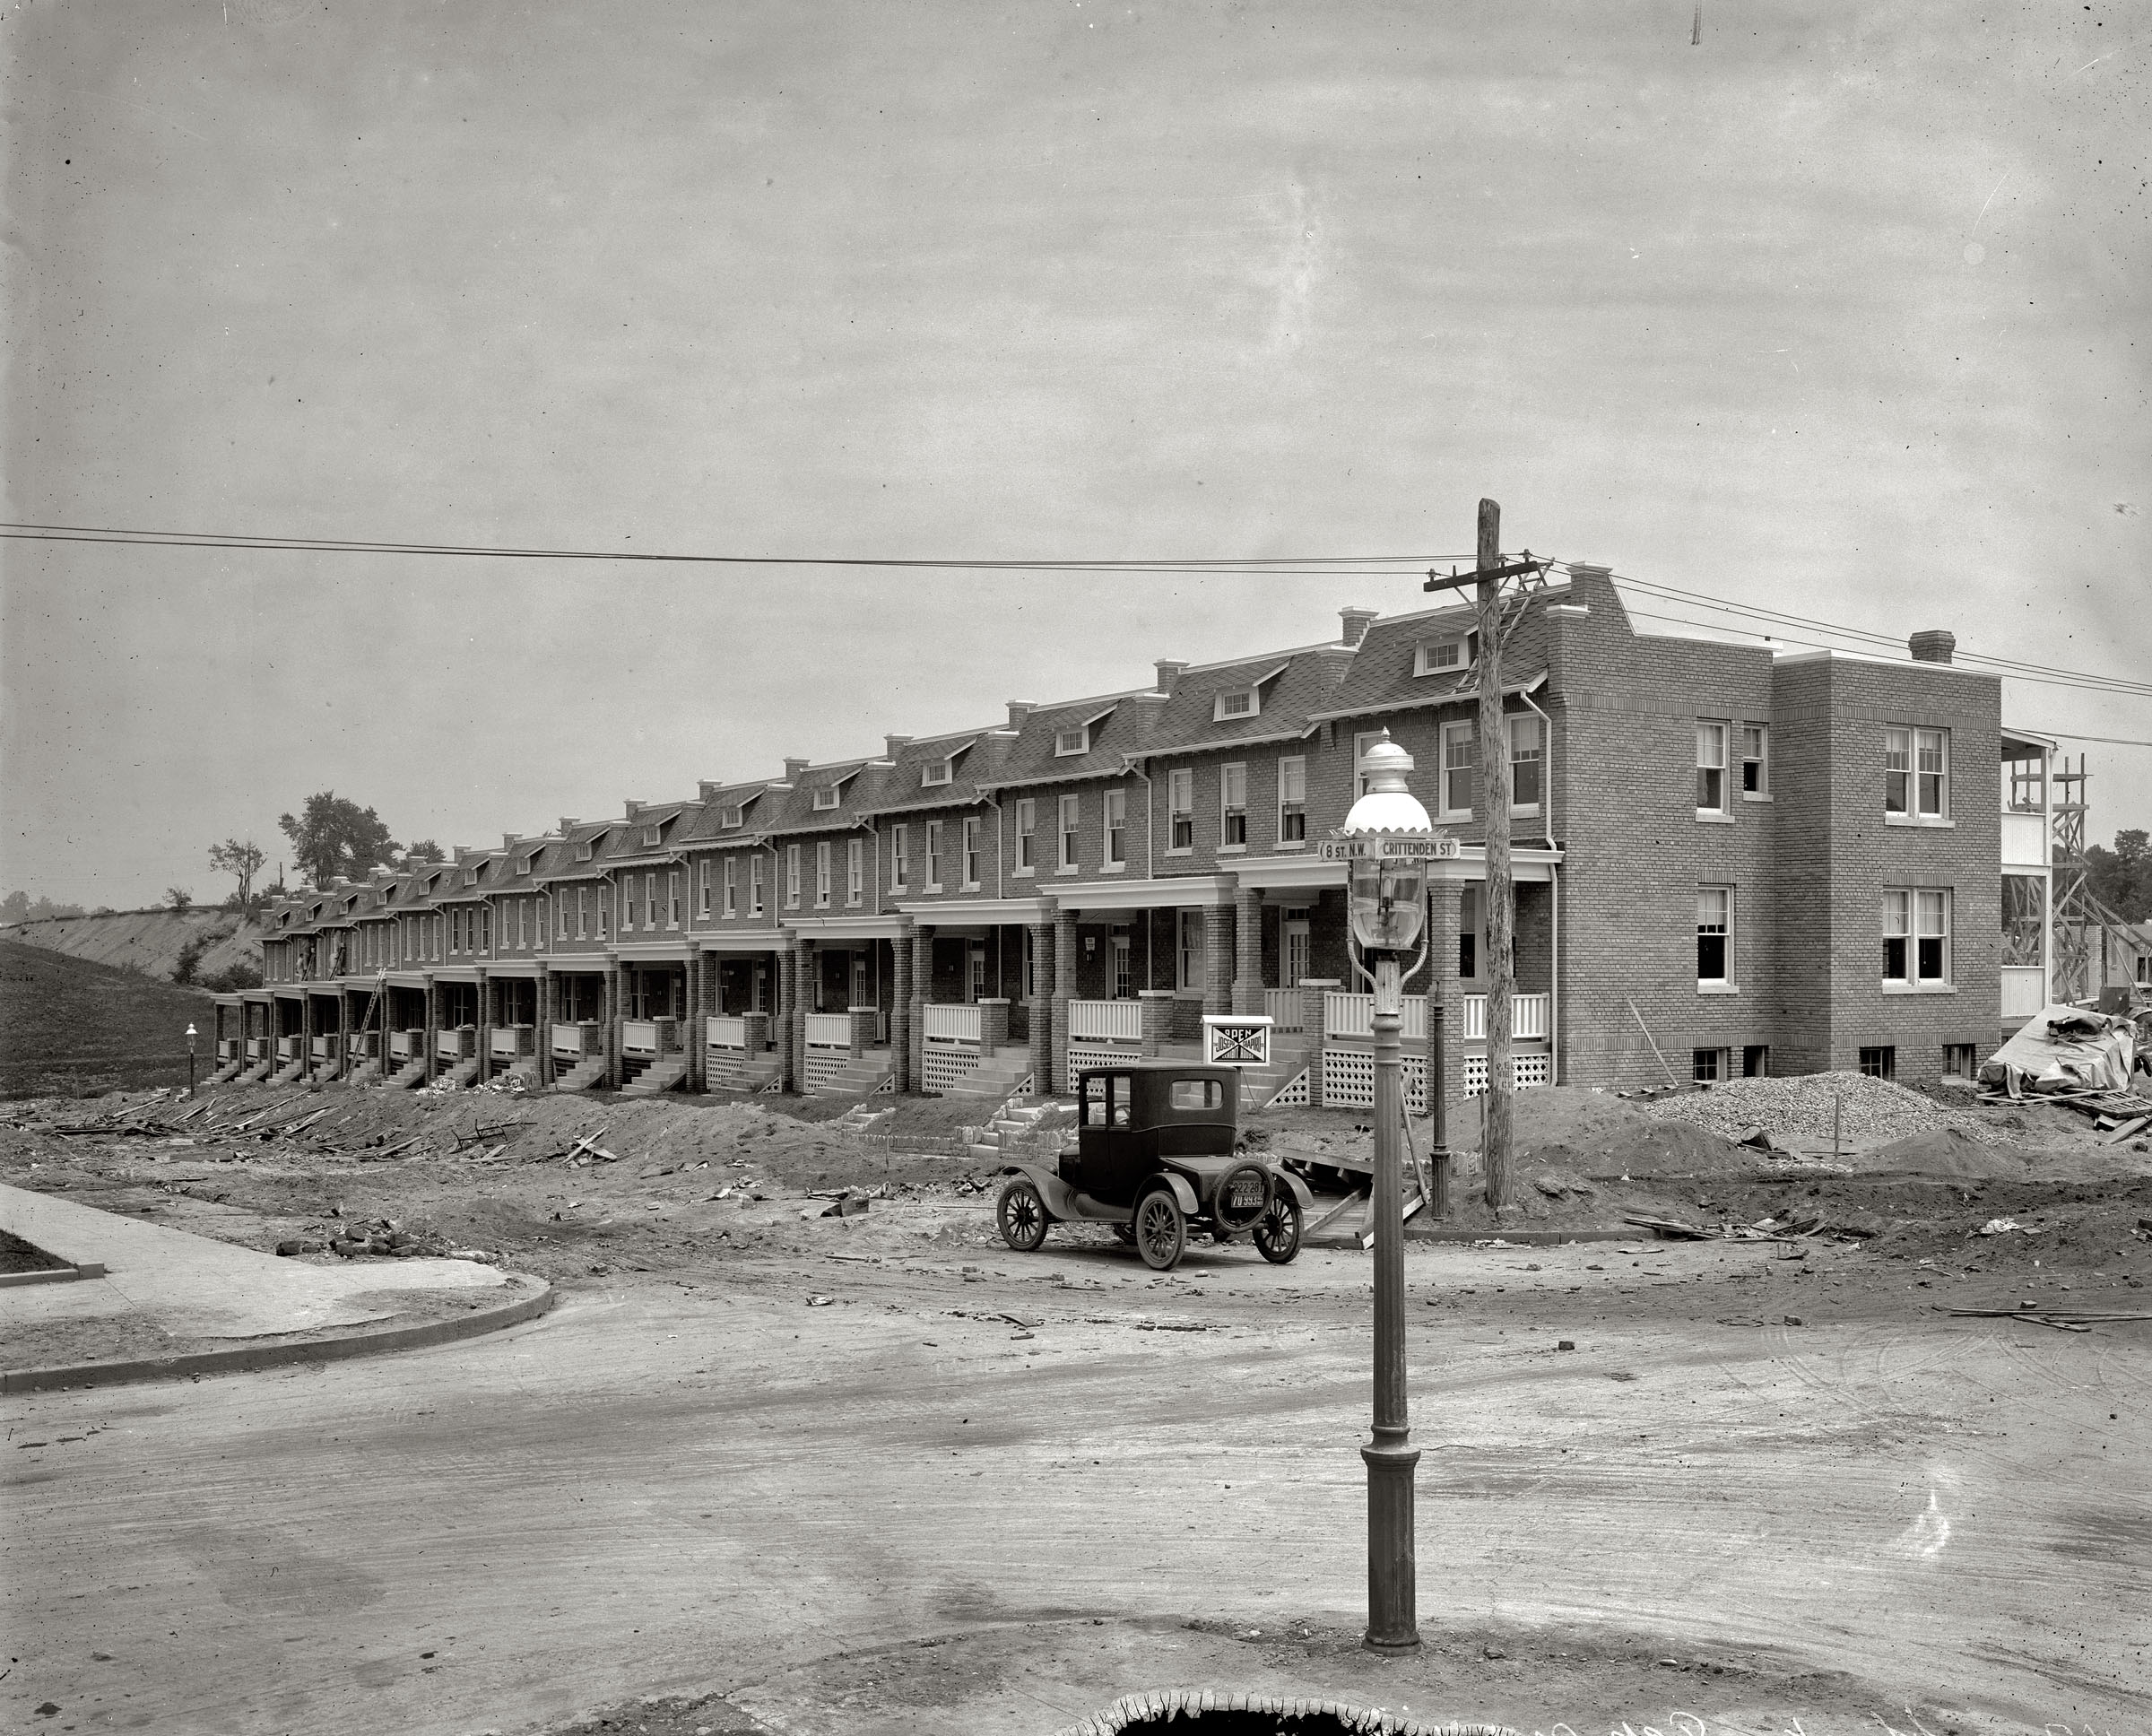 1923. "Allied Asphalt Products Co., 4700 block of 8th St." The Joseph Shapiro Company Exhibit House at Eighth and Crittenden streets N.W. in Washington, D.C. National Photo Company Collection glass negative. View full size.